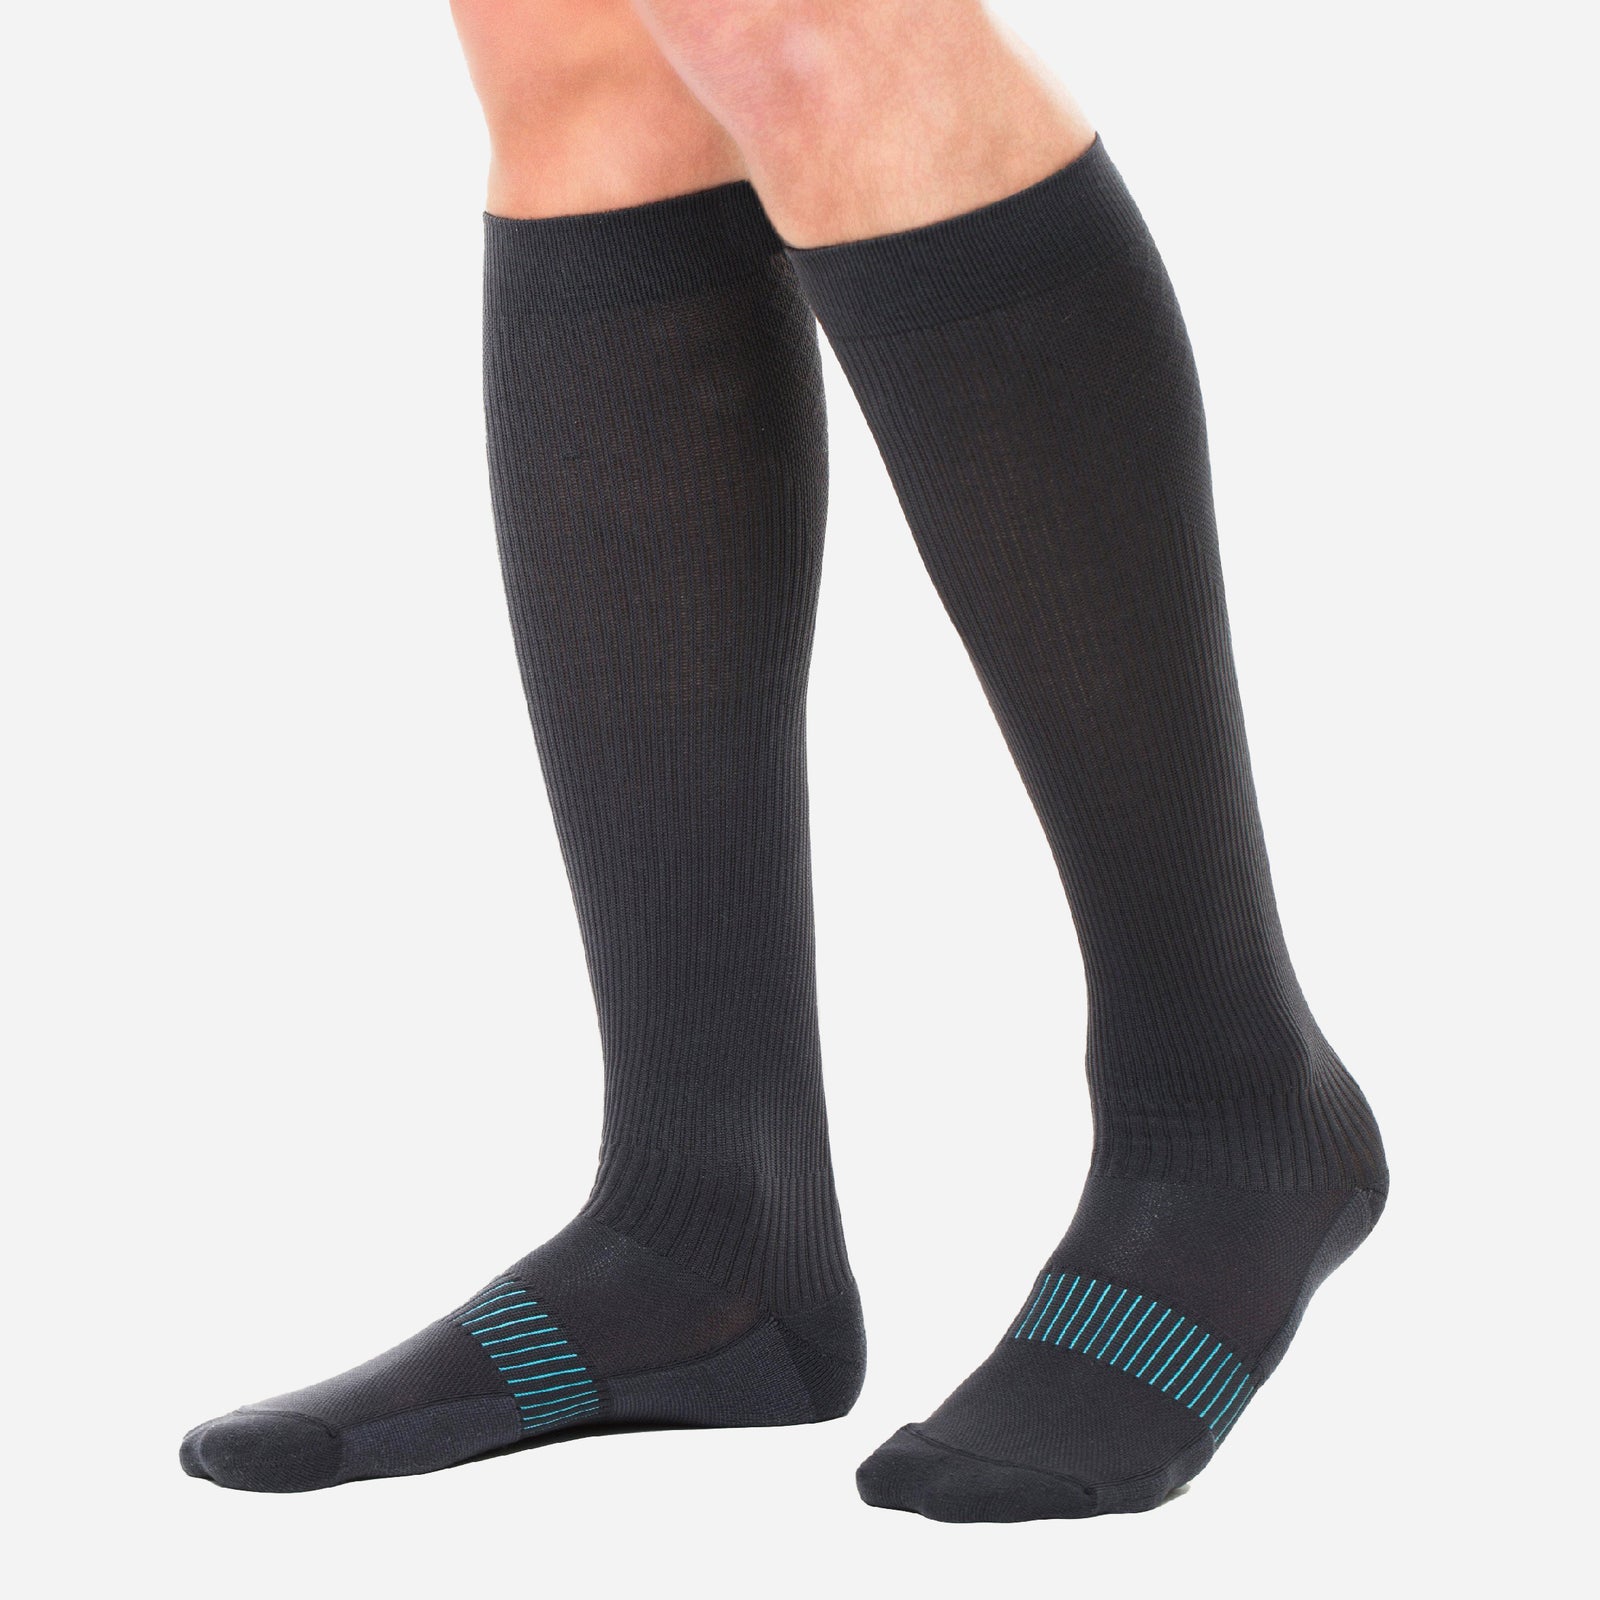 Copper Fit Ice Compression Socks Menthol Infused Black S/M. New In Box